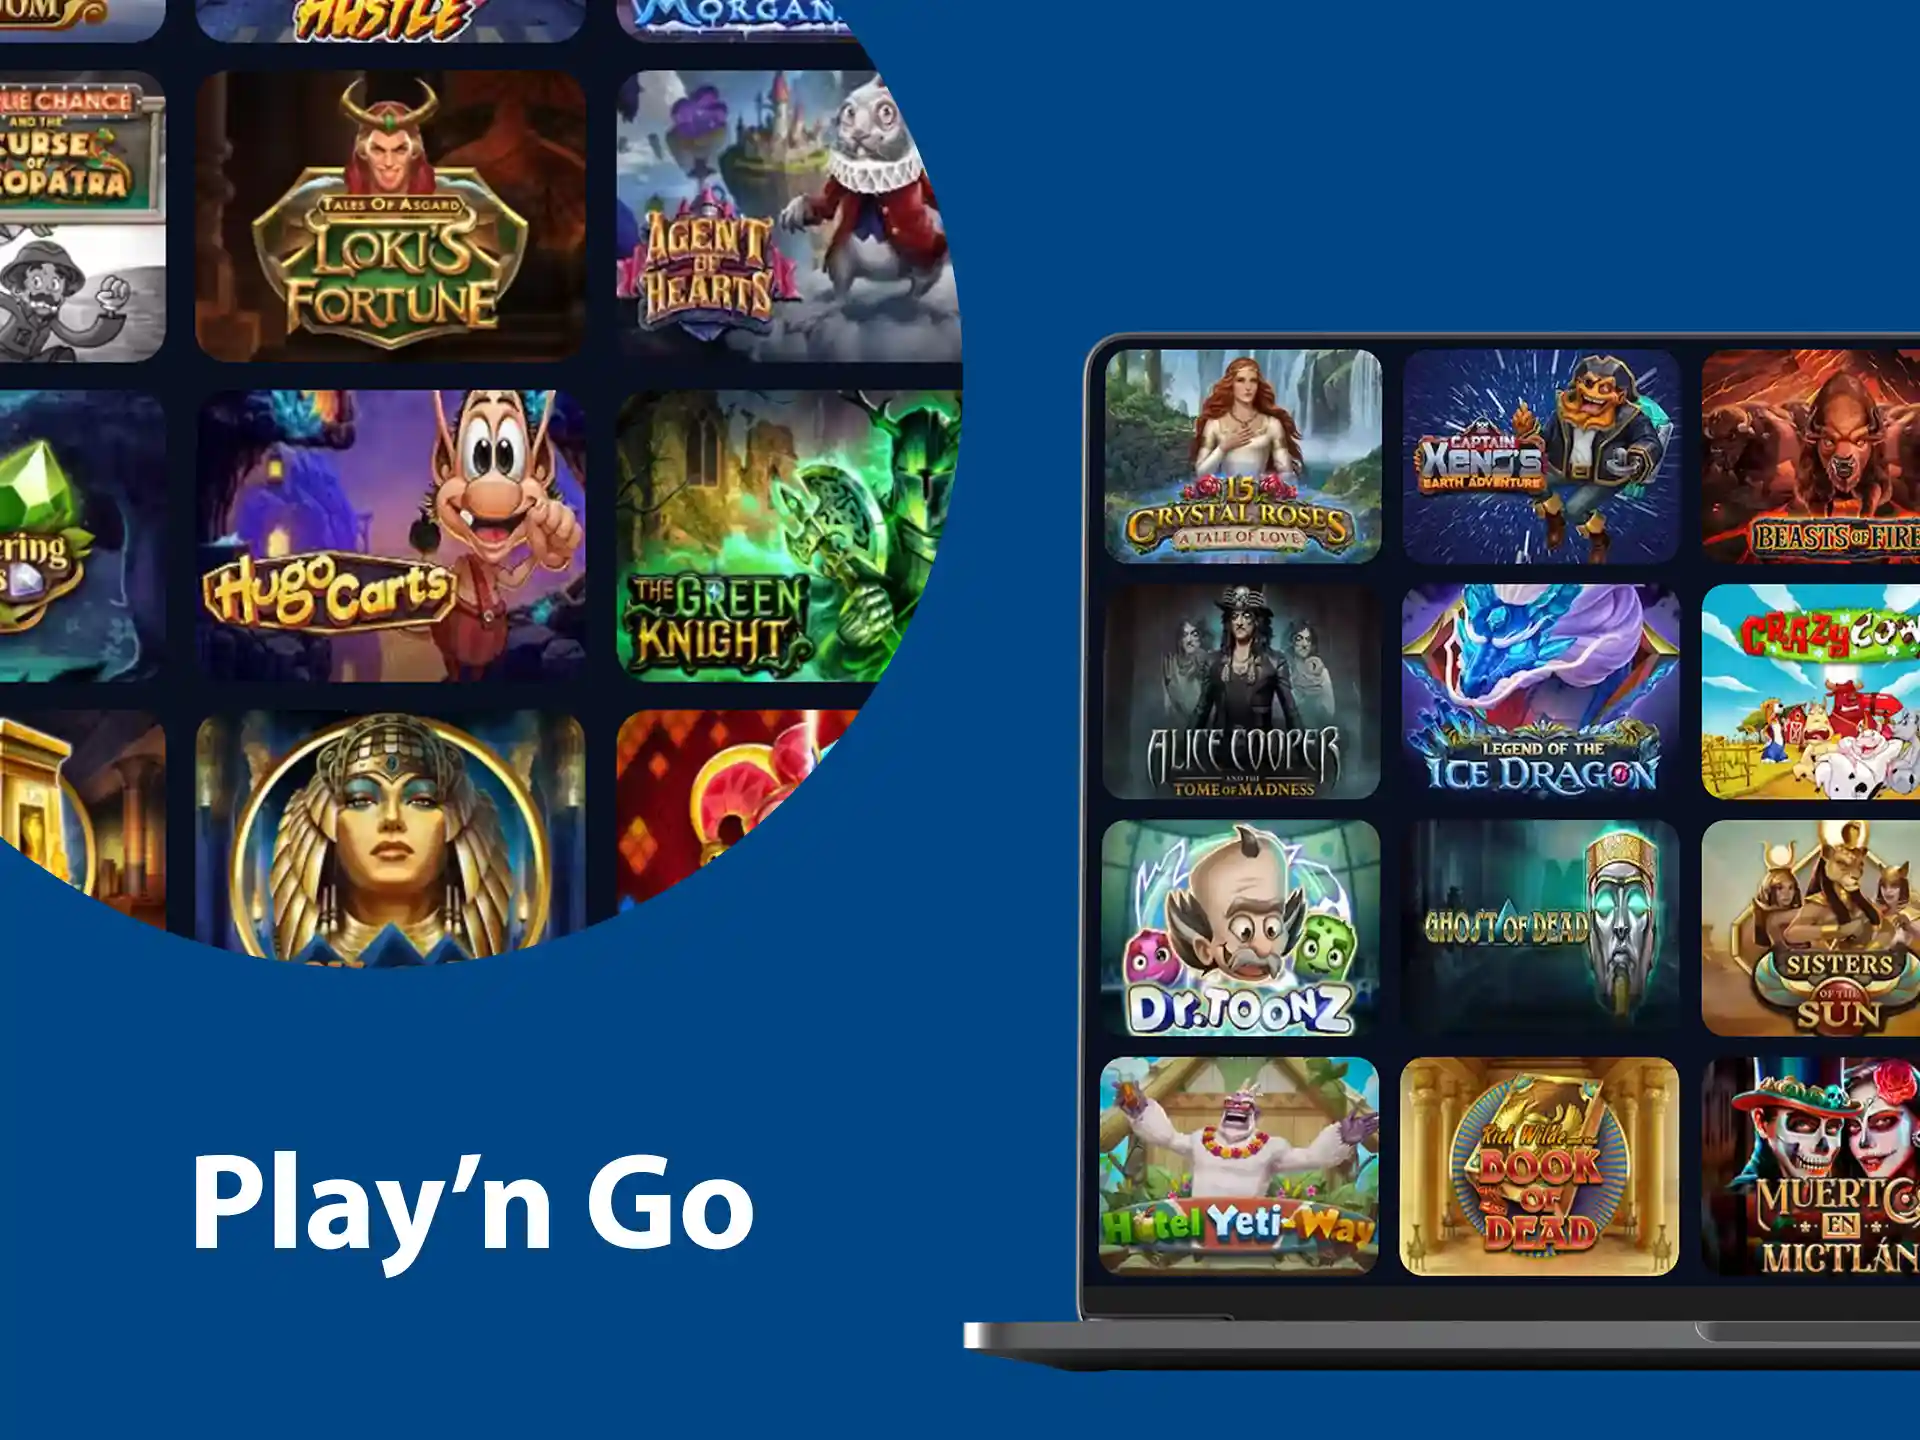 Play'n Go releases a new video slot every week that is unrivaled.